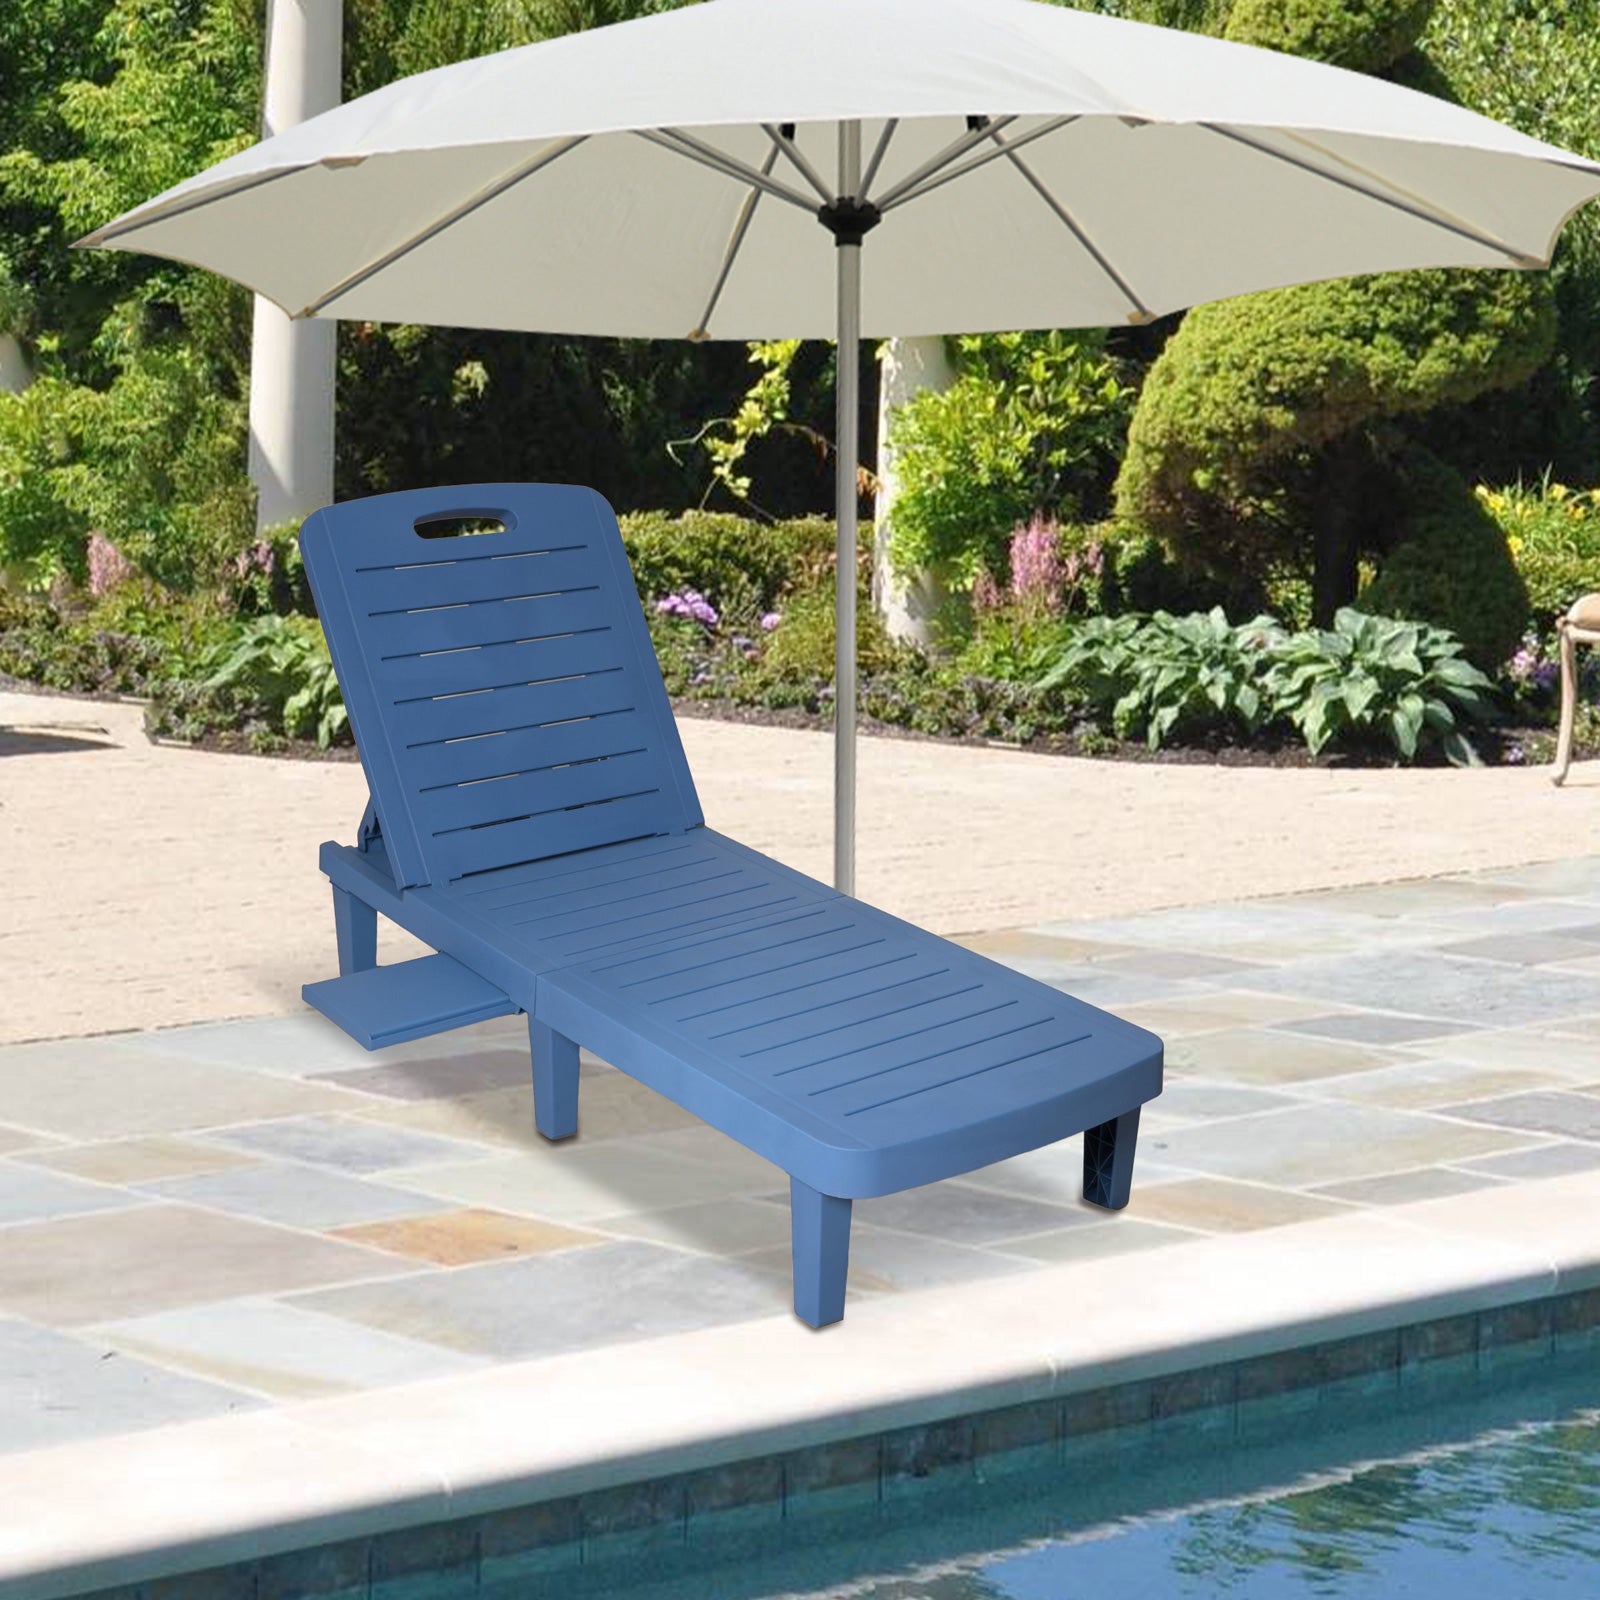 74.4" Outdoor Chaise Lounge Patio Pool Lounge Chairs with 4 Level Adjustable Backrest, Blue